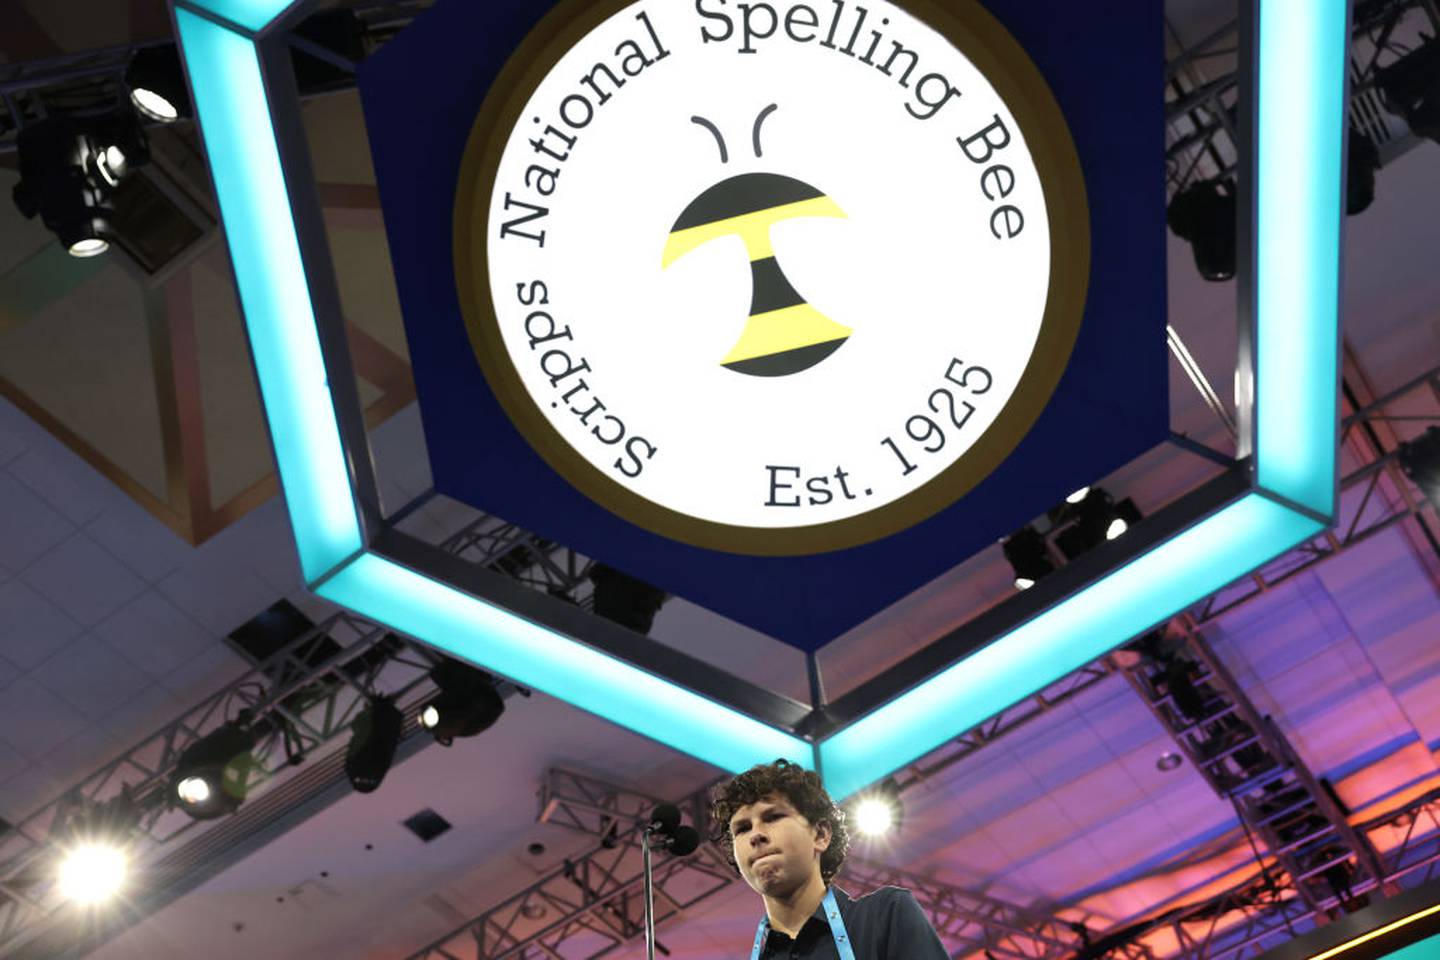 NATIONAL HARBOR, MARYLAND - MAY 30: Speller Luke Brown of Naples, Florida, participates in rounds 1 and 2 of the 2023 Scripps National Spelling Bee at Gaylord National Hotel and Convention Center on May 30, 2023 in National Harbor, Maryland. The 95th Scripps National Spelling Bee begins today through Thursday with 230 students competing for the spelling top honor.